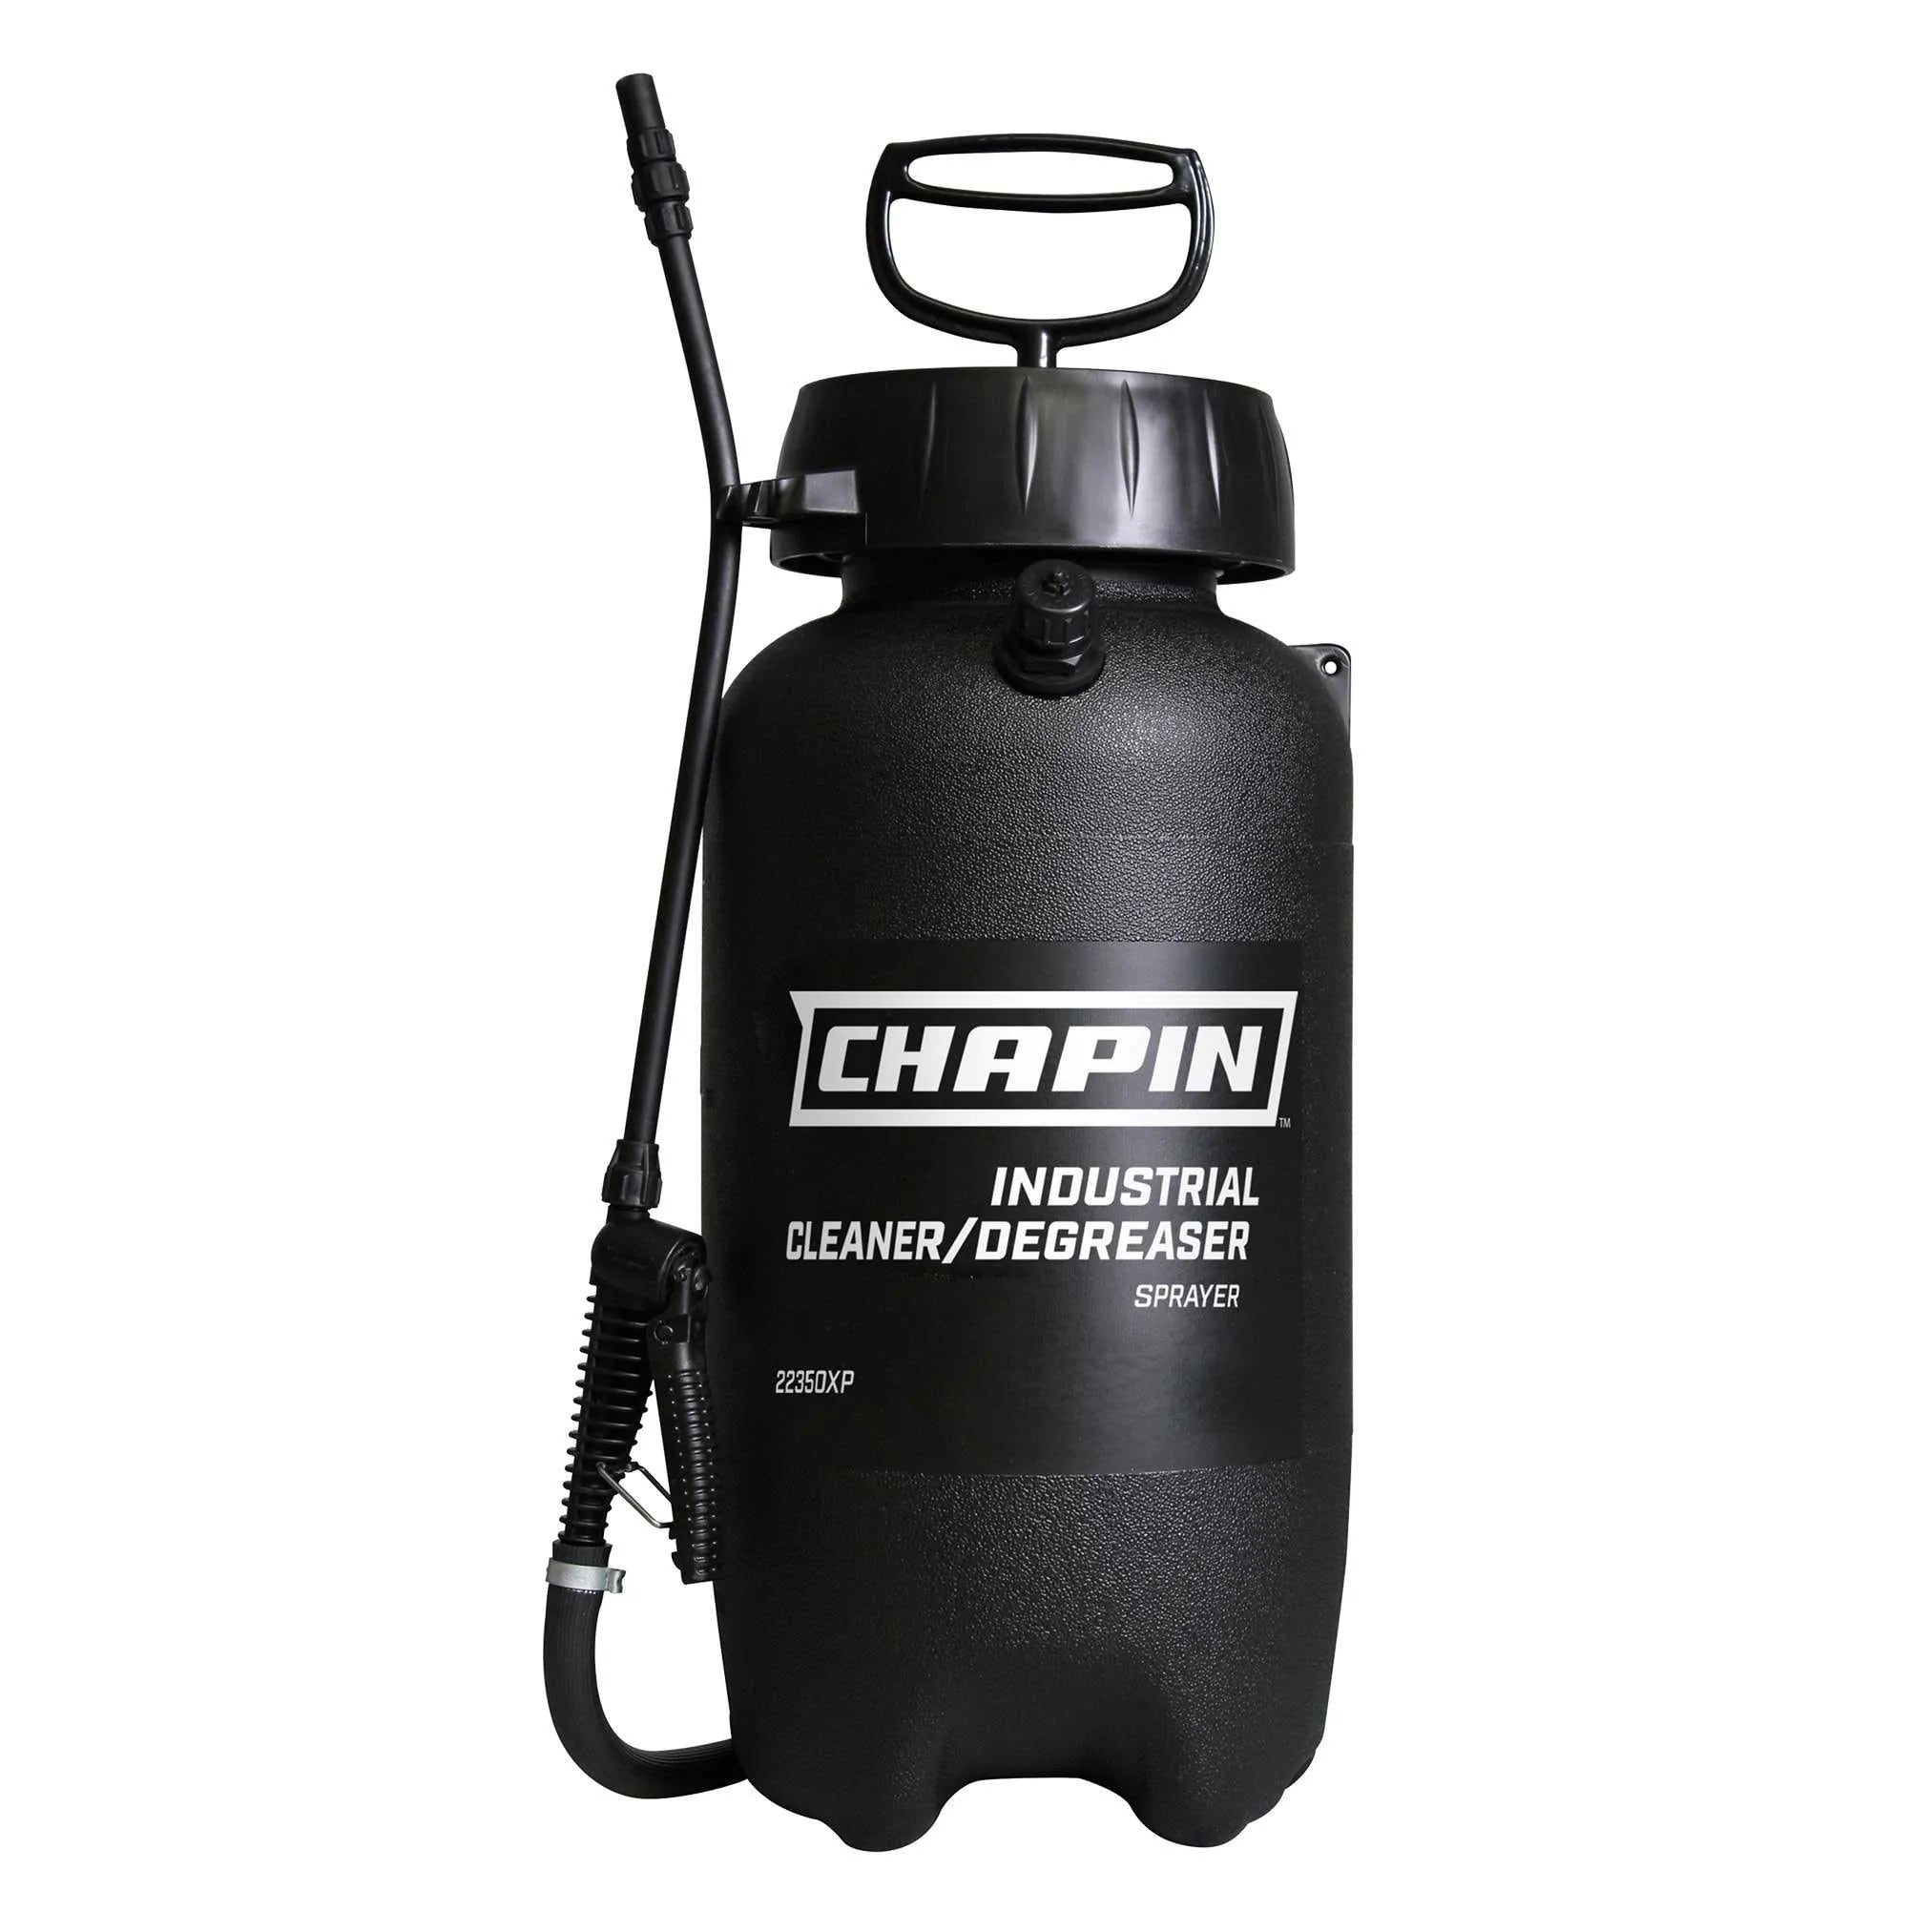 Chapin 1046 48 Ounce Industrial Cleaner/Degreaser Handheld Pump